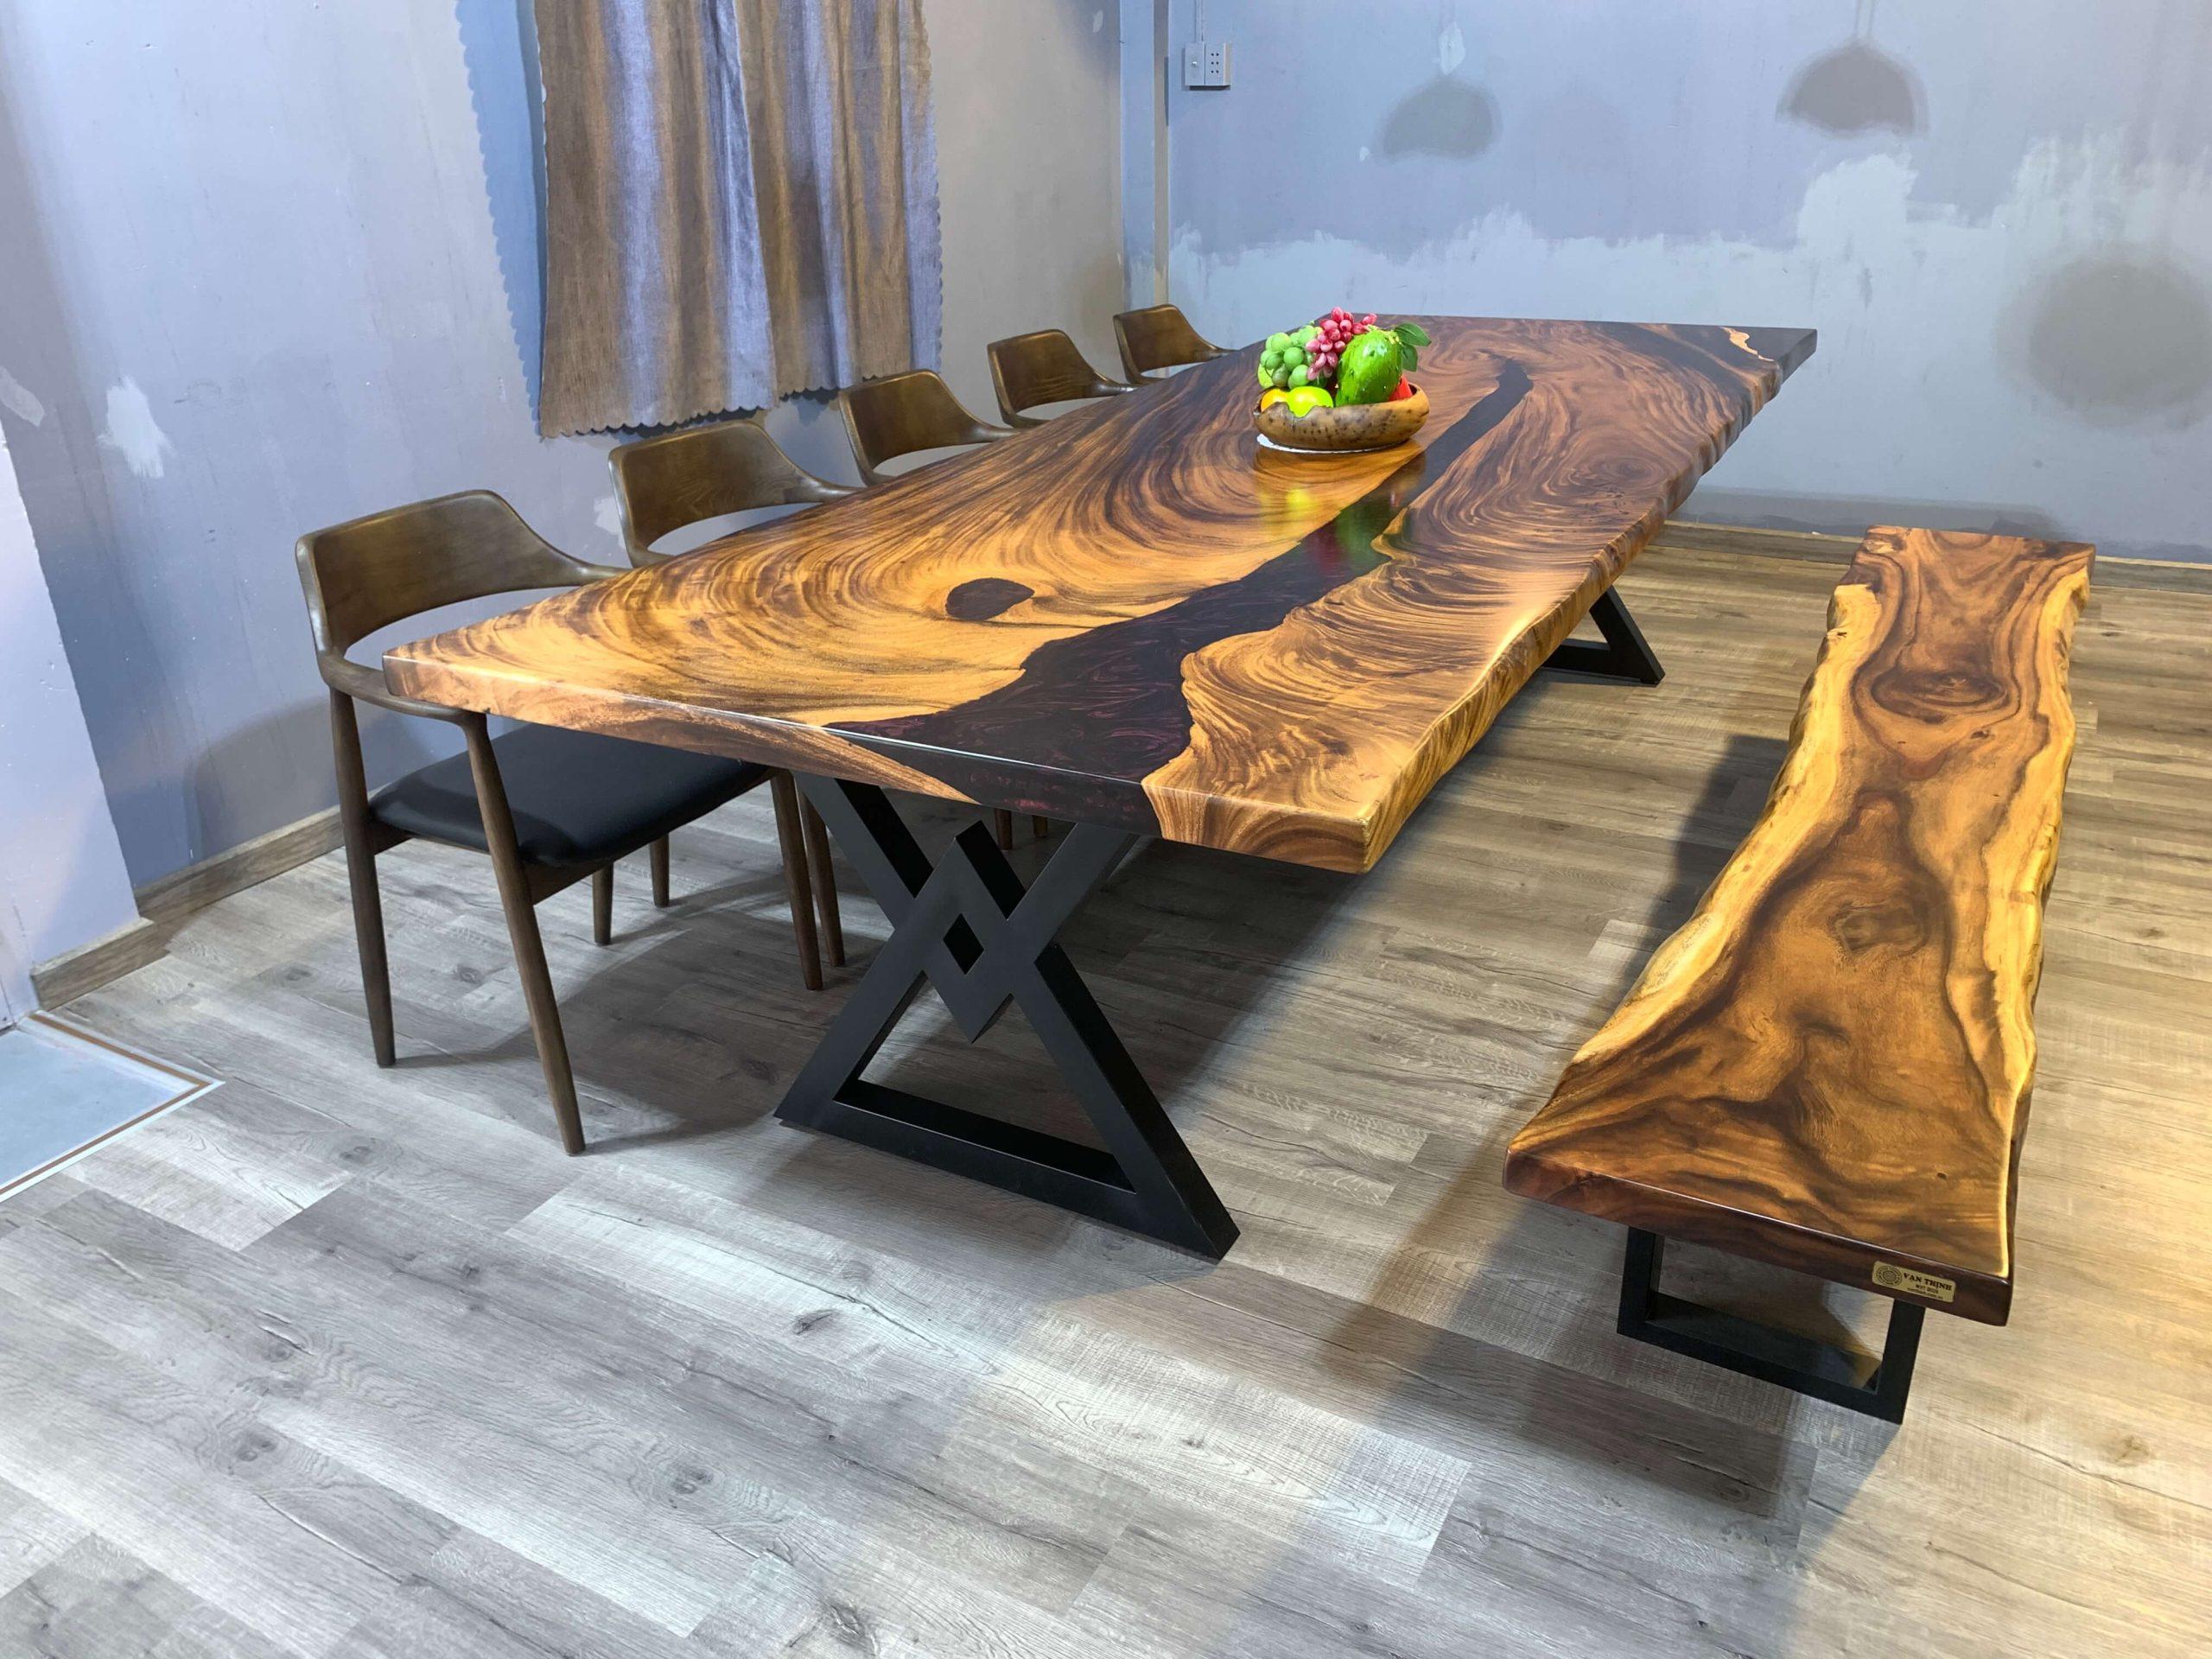 

        
EUROPEAN FURNITURE Sapo Dining Table WVT0044-118-T Dining Table Wood/Black  65422929384988
